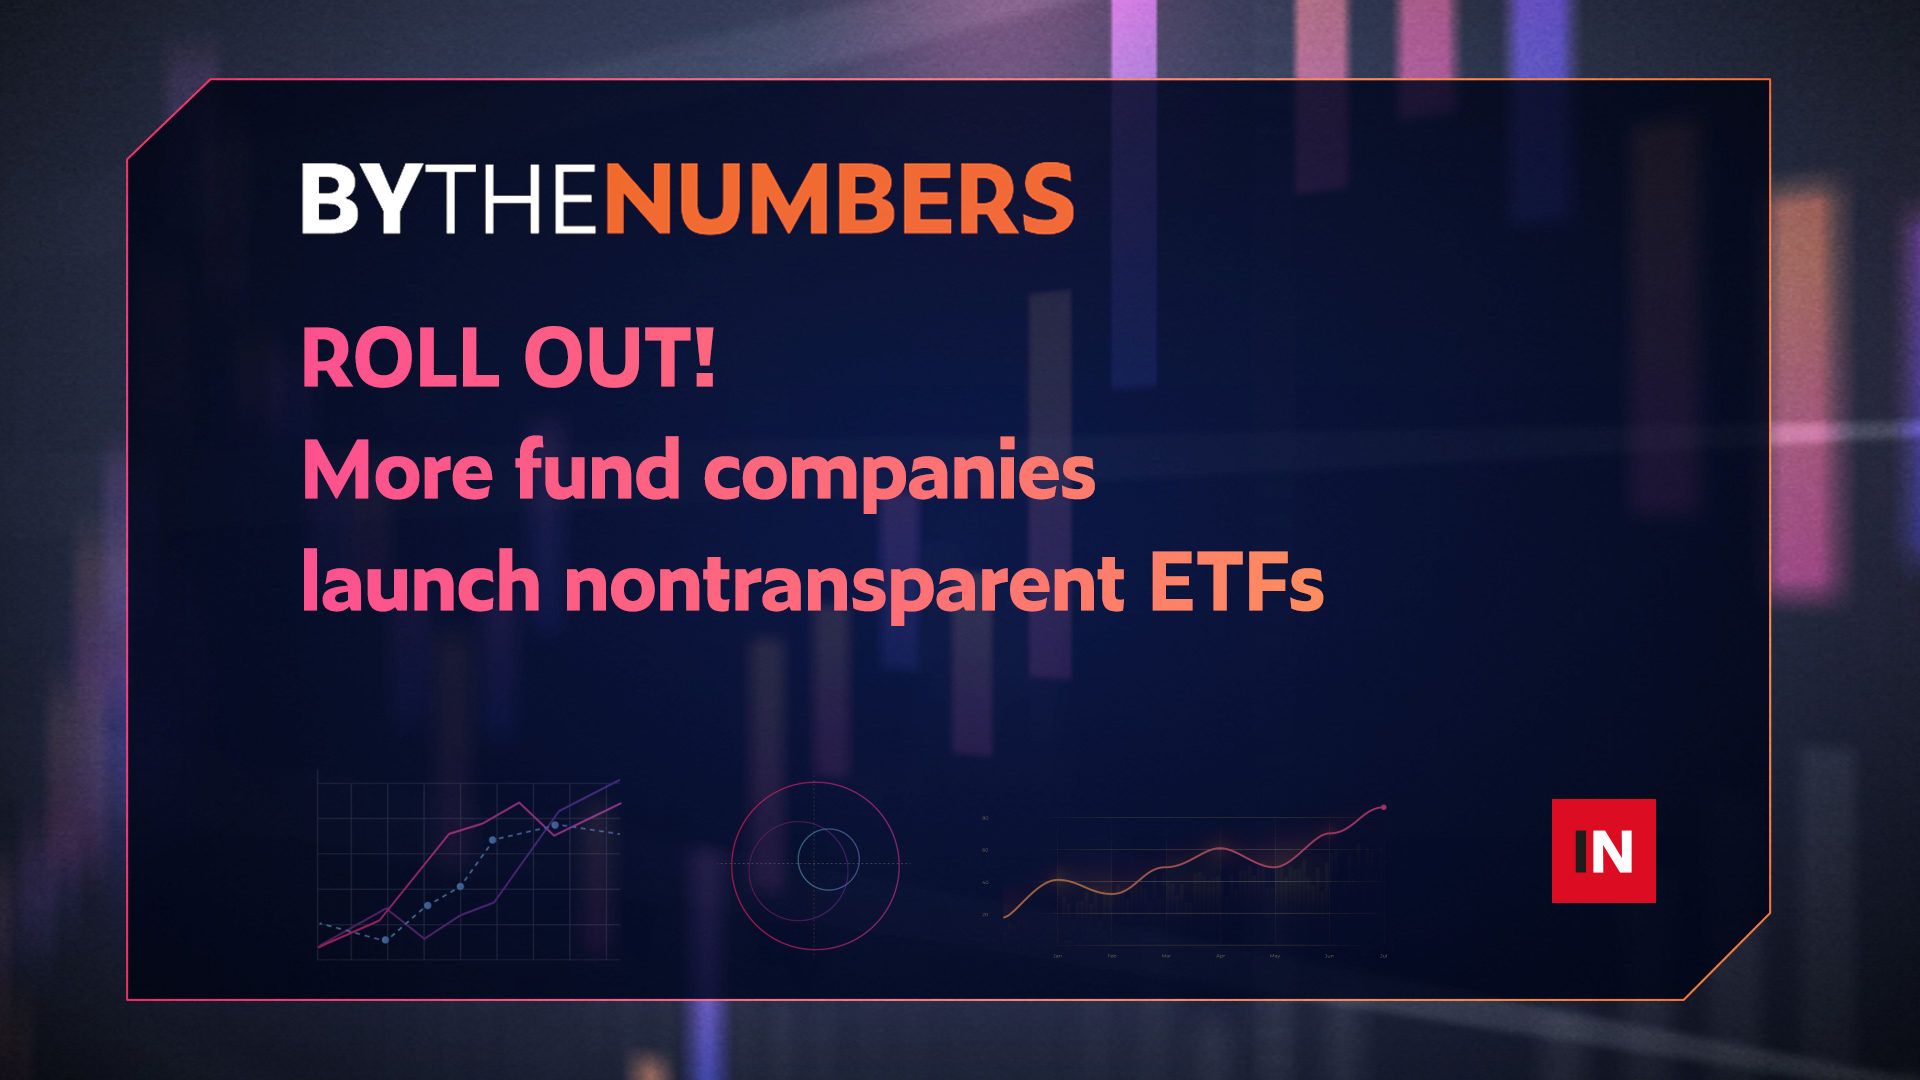 More fund companies roll out nontransparent ETFs